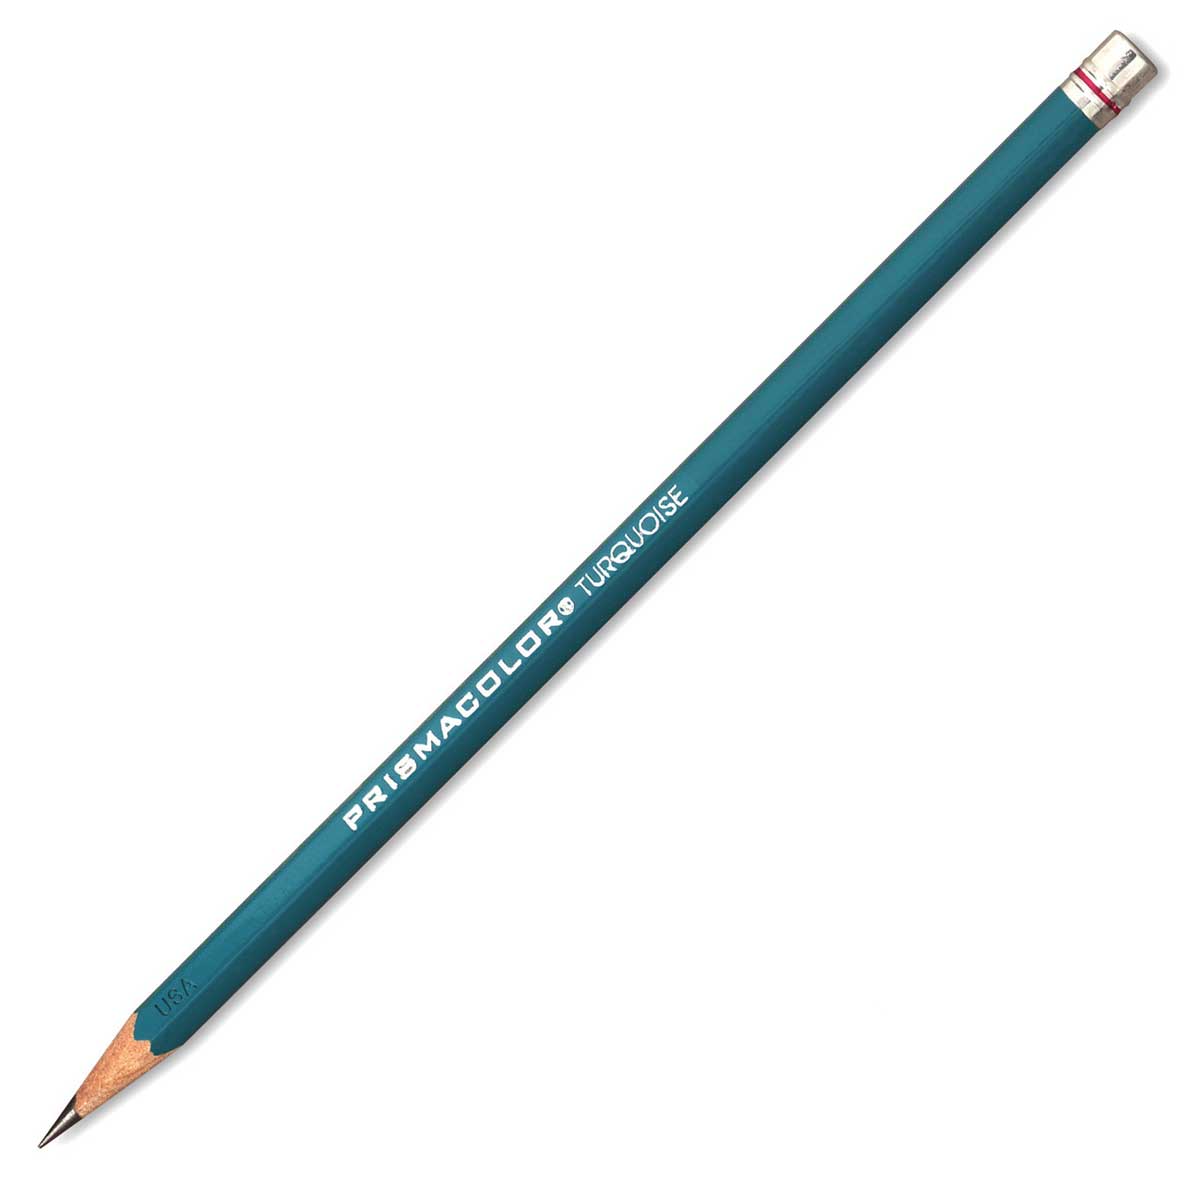 Prismacolor Turquoise Drawing Pencil - 6B